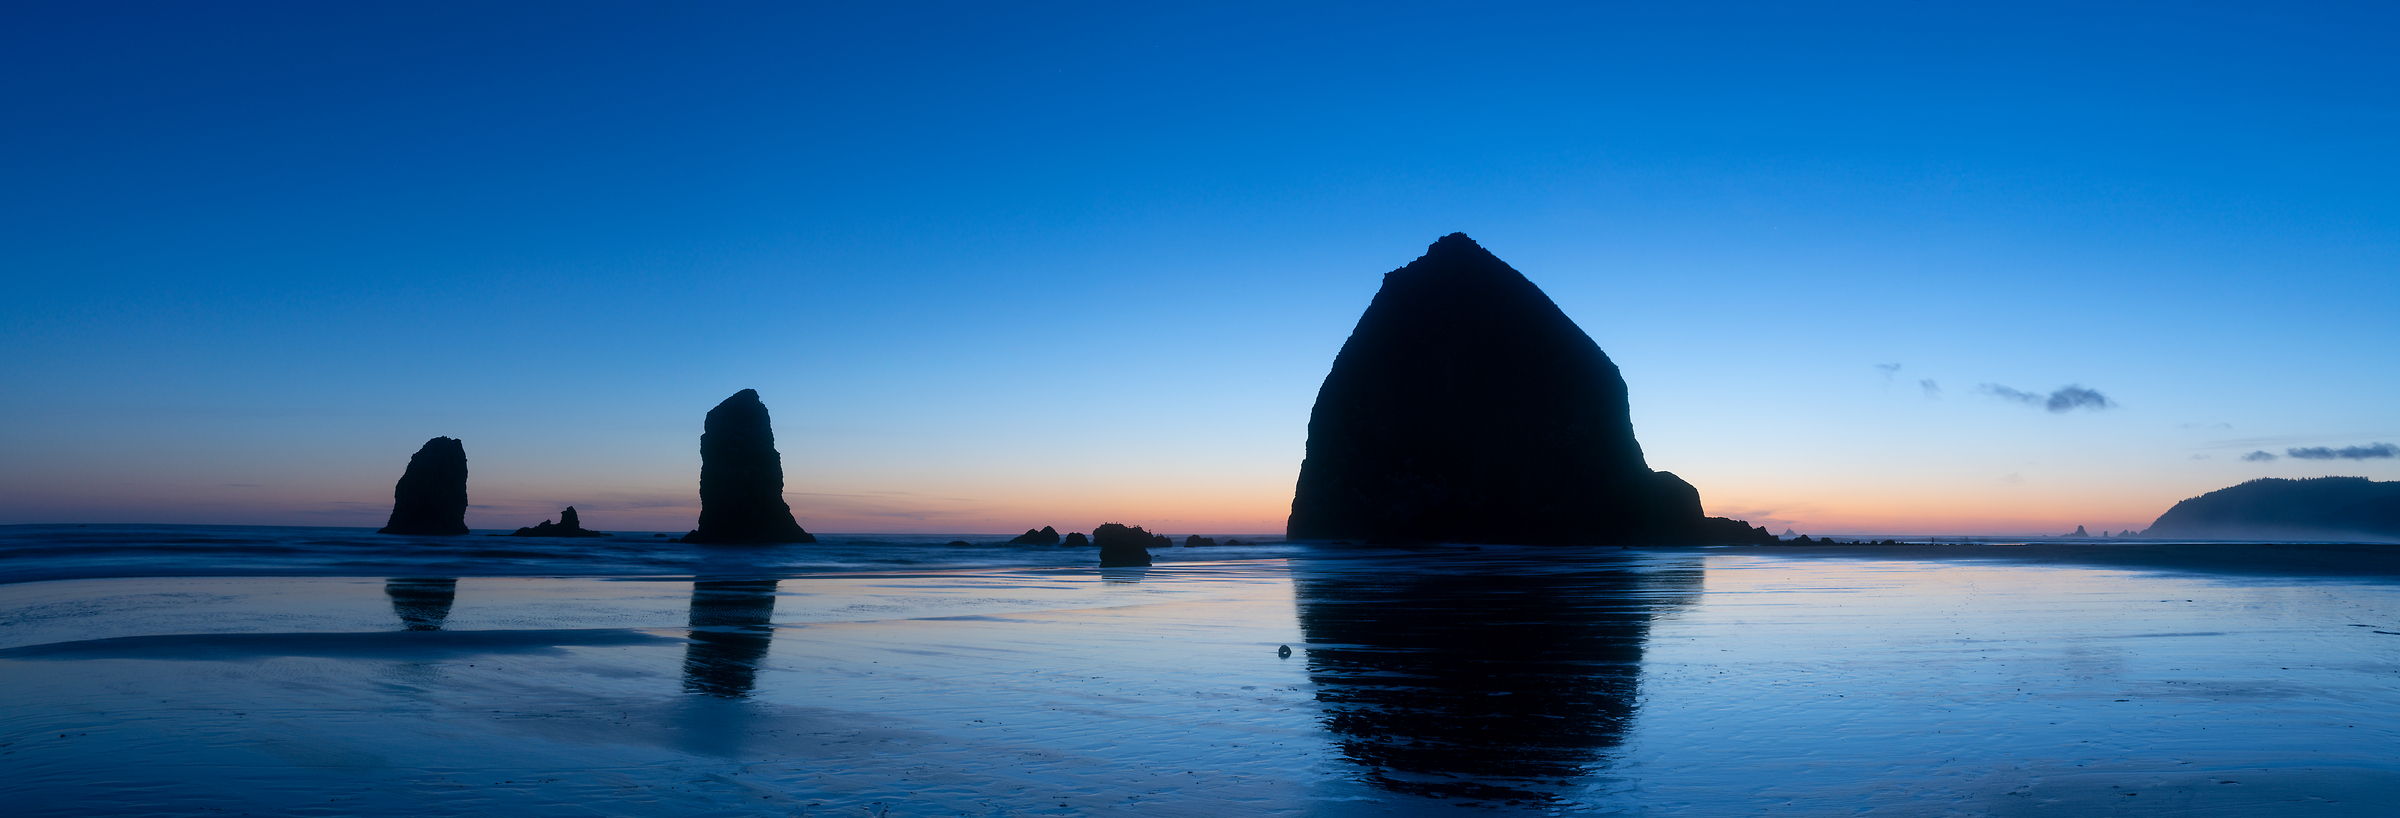 320 megapixels! A very high resolution, large-format VAST photo print of a coastline in the Pacific Northwest at twilight with large rock monoliths; photograph created by Greg Probst in Cannon Beach, Oregon, USA.